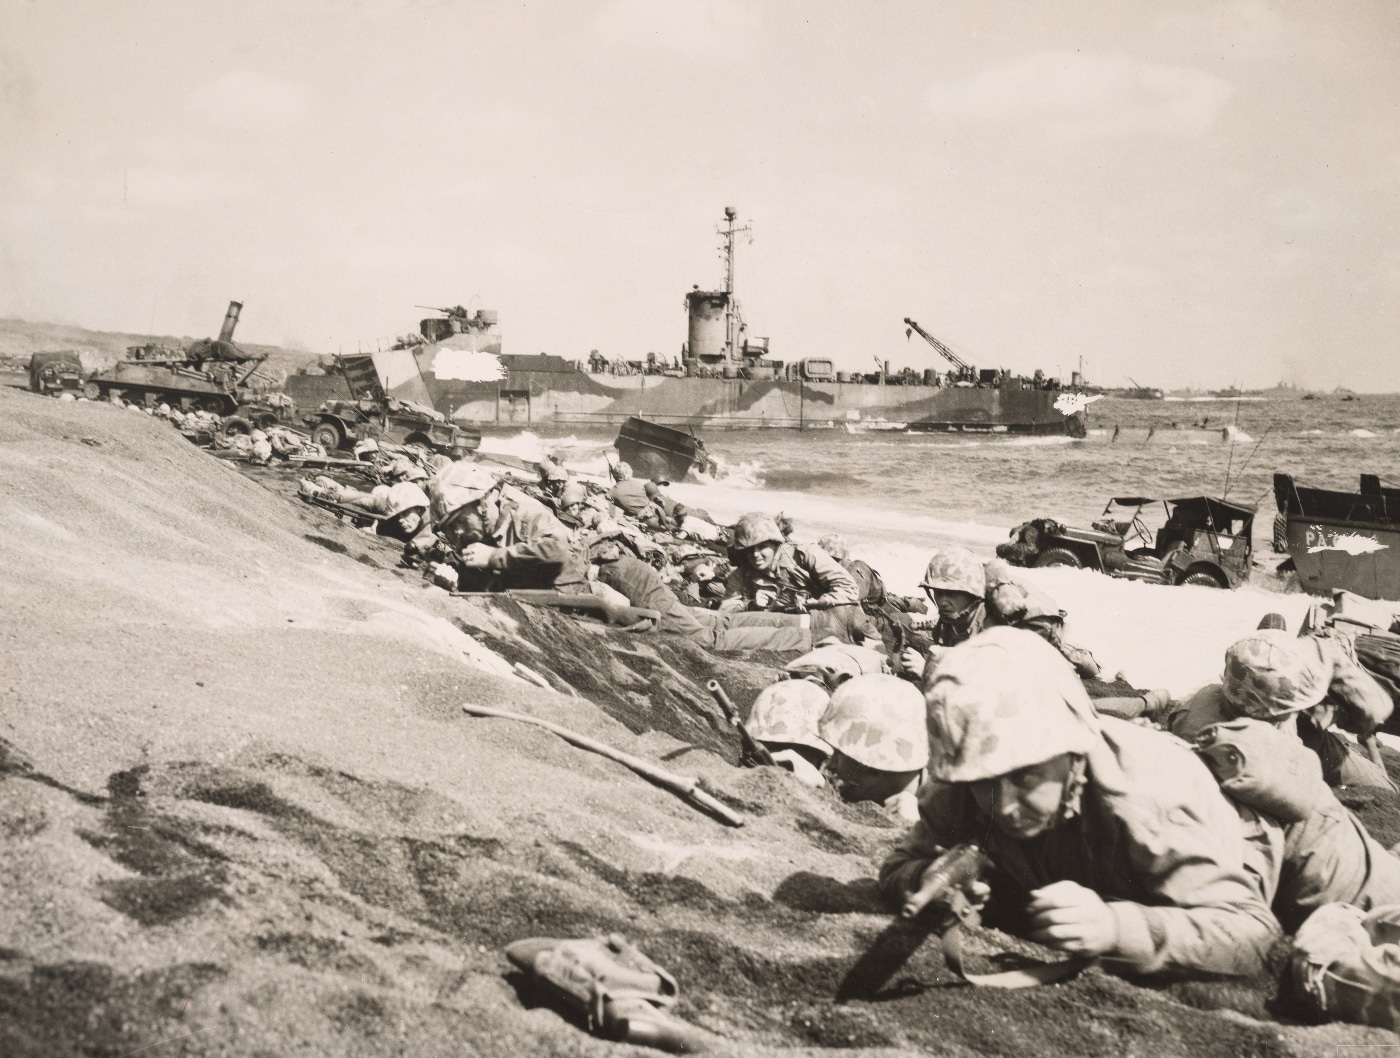 In this digital reproduction of a photograph, we see Marines who landed on the island crawling through the sands of Iwo Jima. An epic battle, Iwo Jima provided a stepping stone to the ultimate invasion of mainland Japan. The Iwo Jima Marine Corps War Memorial in Arlington, Virginia is based on the second flag raised at the summit of Mount Suribachi. It was a larger flag in the popular Marines raising the American flag photos and video.